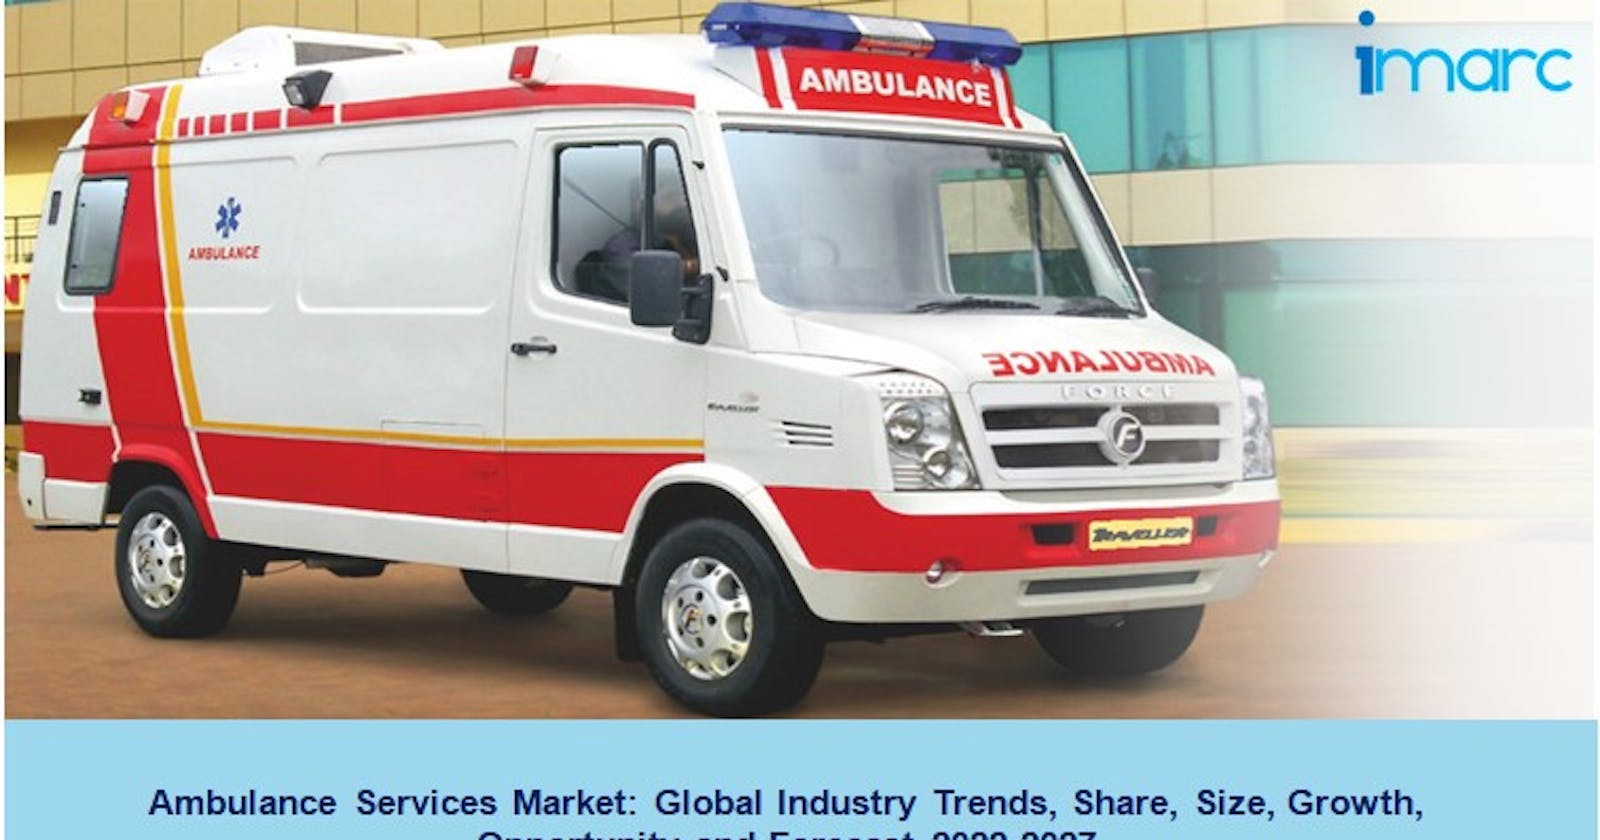 Ambulance Services Market Size, Demand, Growth and Forecast 2022-2027